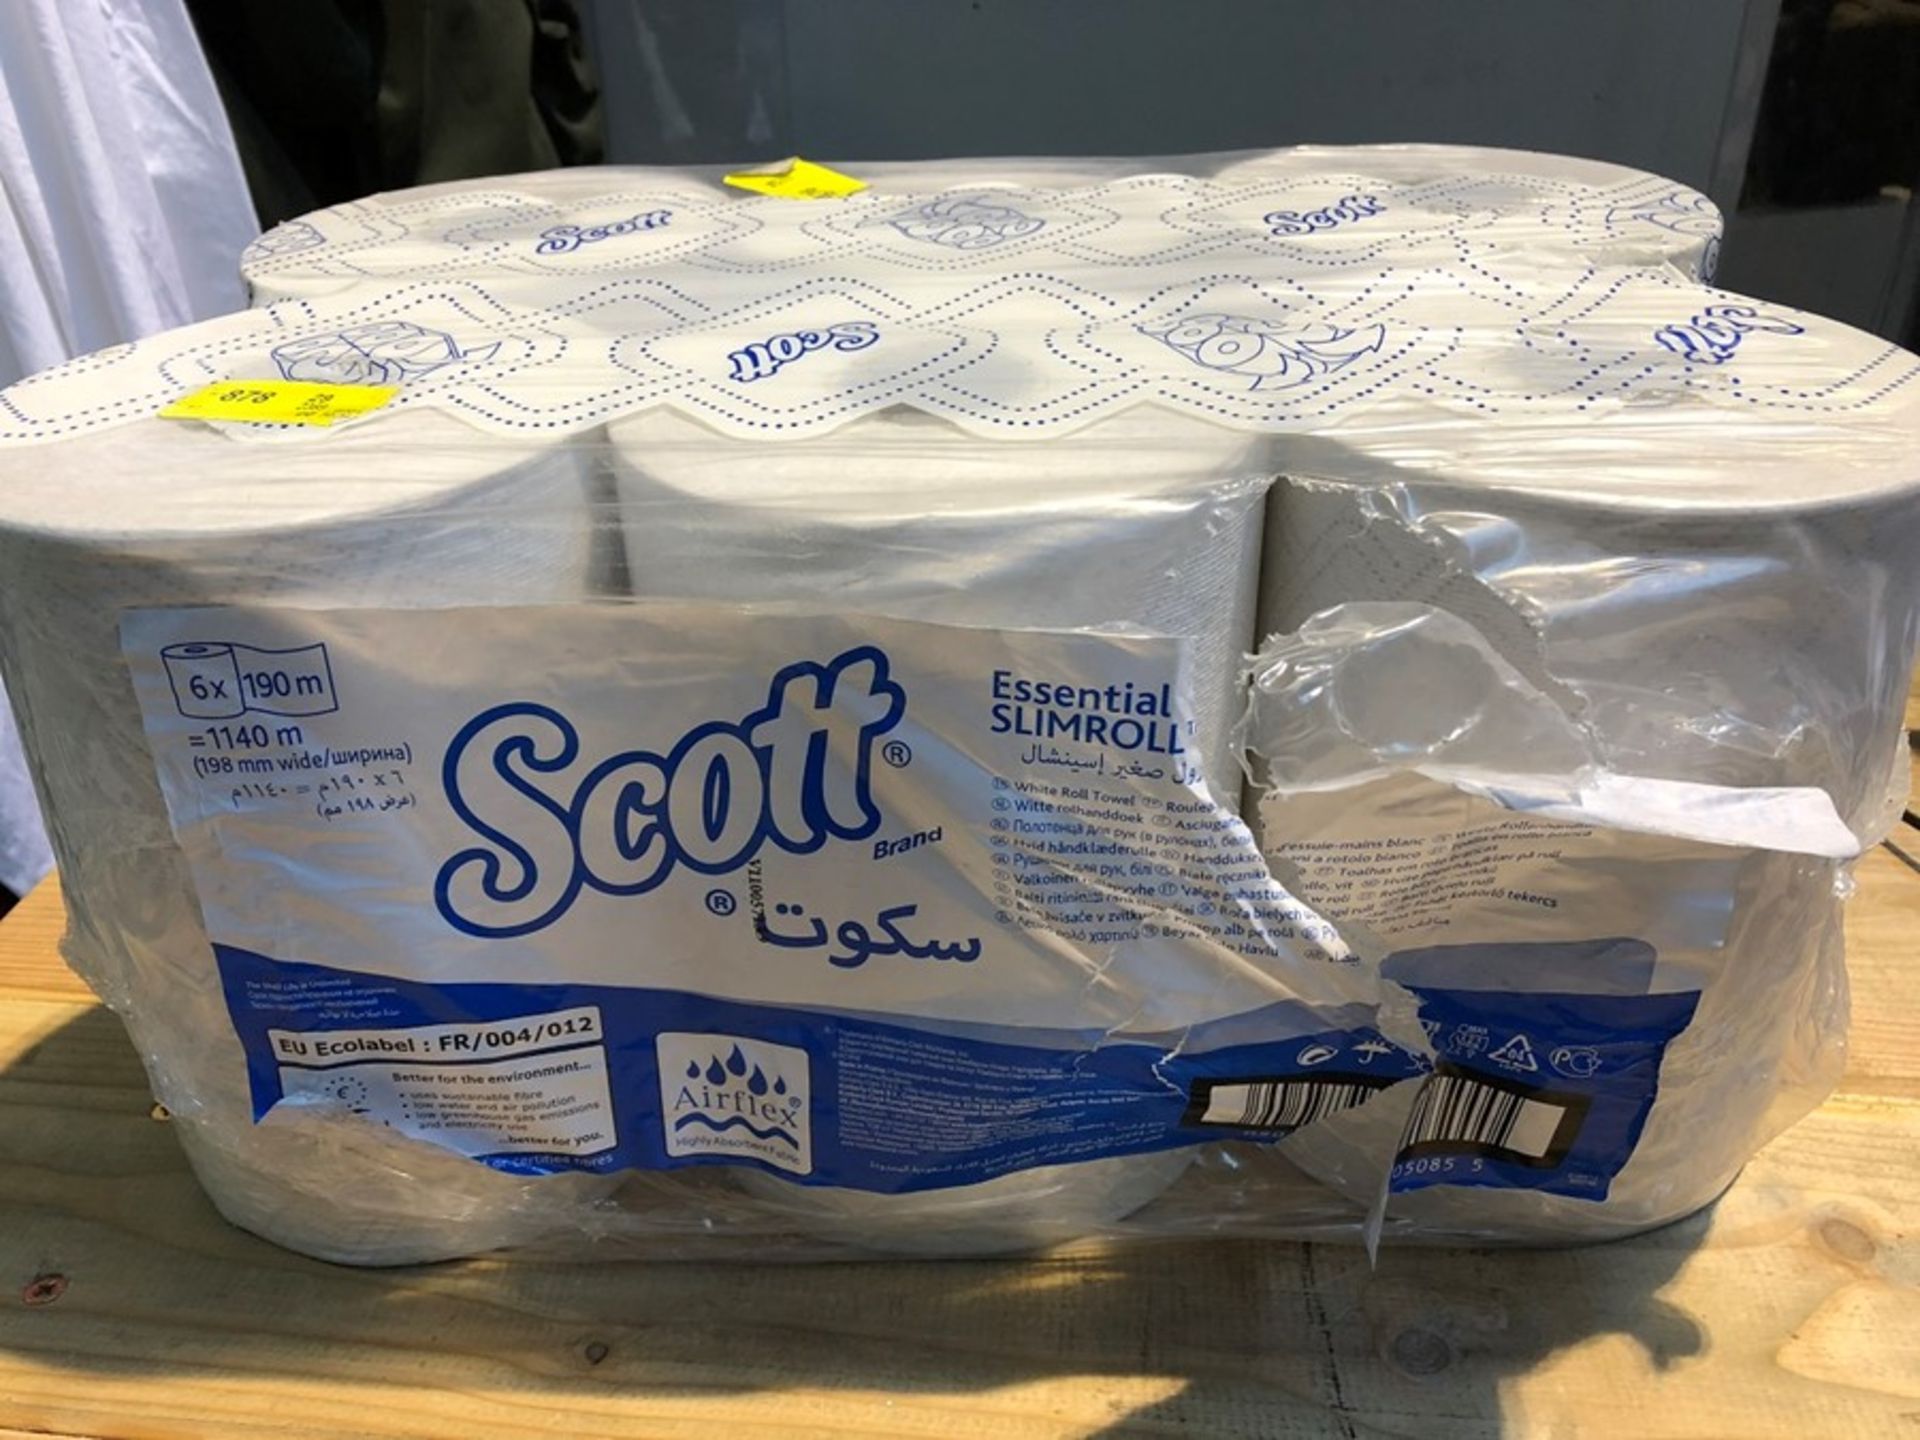 1 BAGGED 6 PACK OF SCOTT SLIMROLL PAPER HAND TOWELS IN WHITE / PN - 894 (PUBLIC VIEWING AVAILABLE)